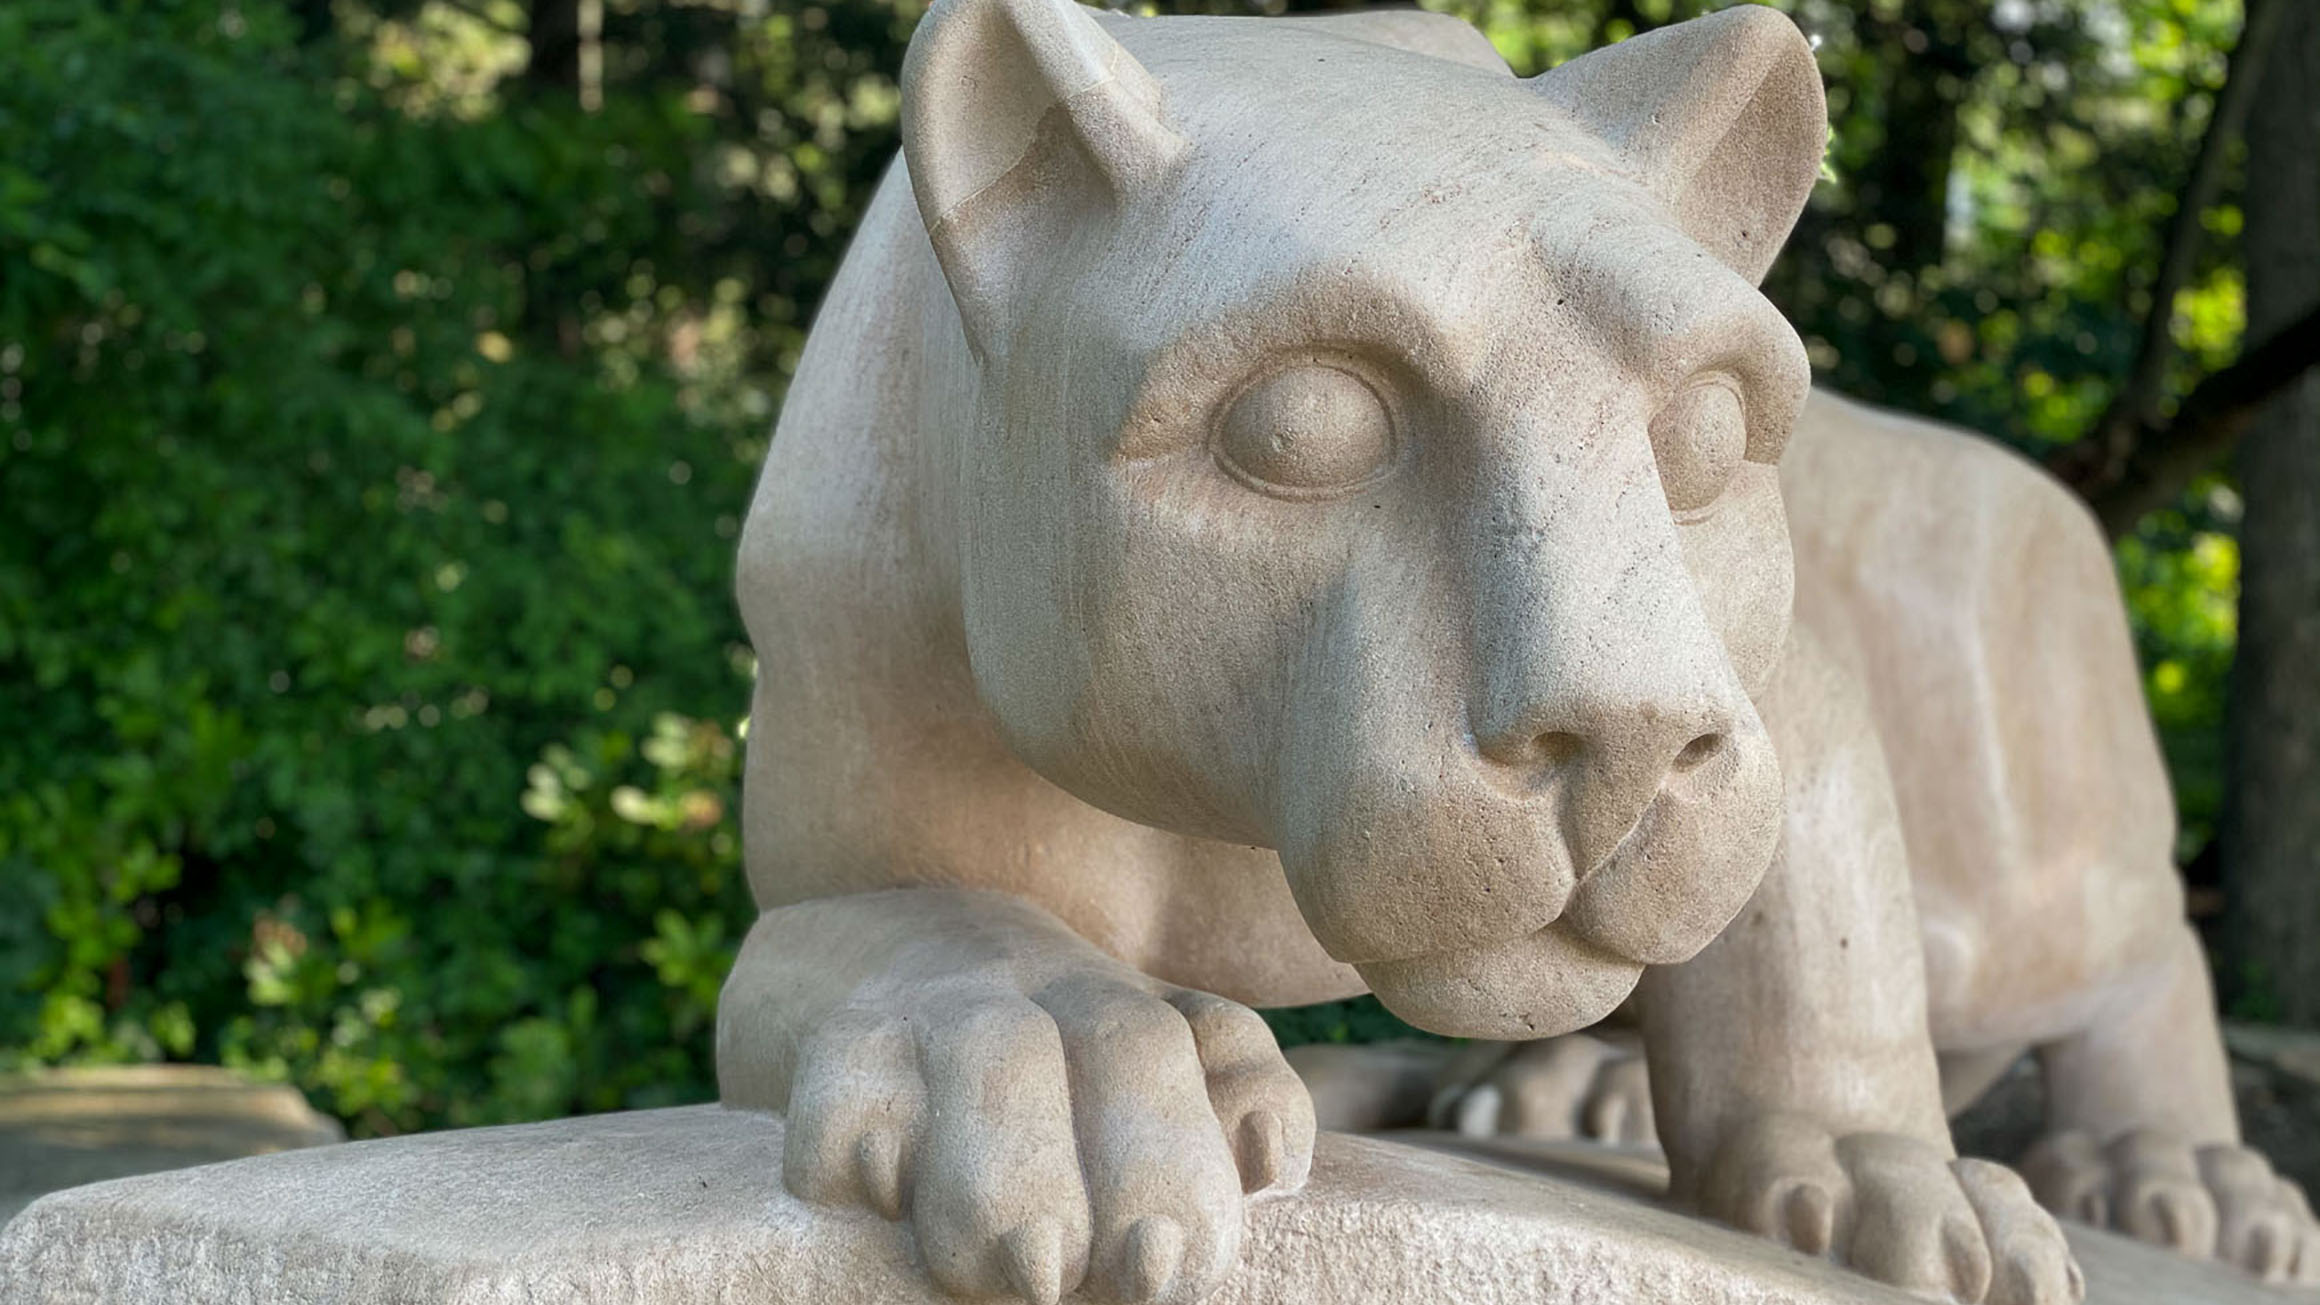 The Nittany Lion Shrine is seen